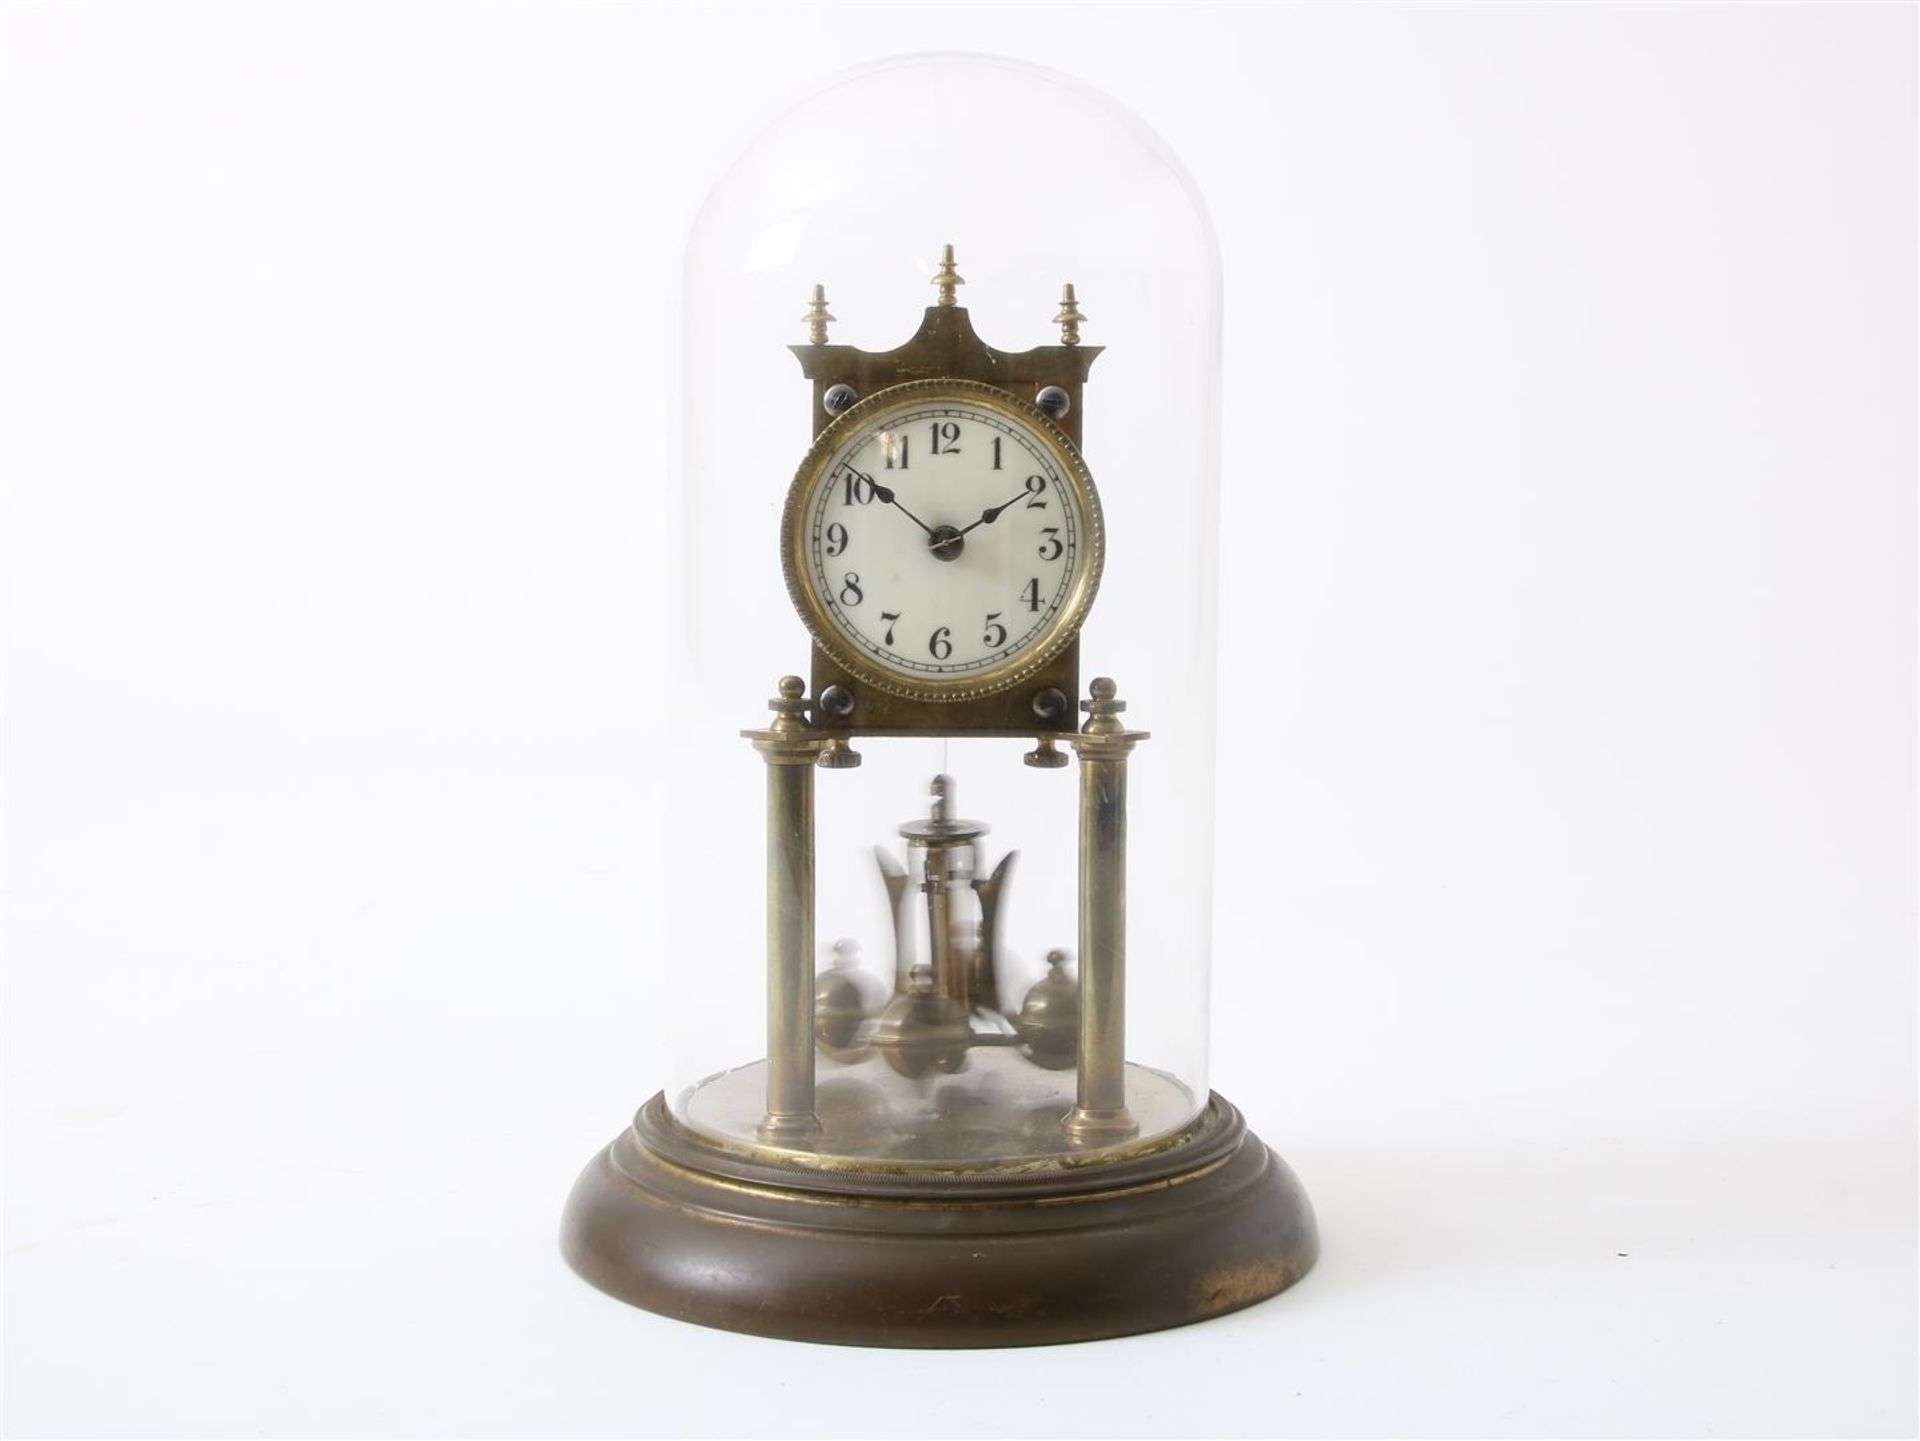 Brass year mantel clock with enamel dial, so-called 400 day clock under glass bell jar, circa